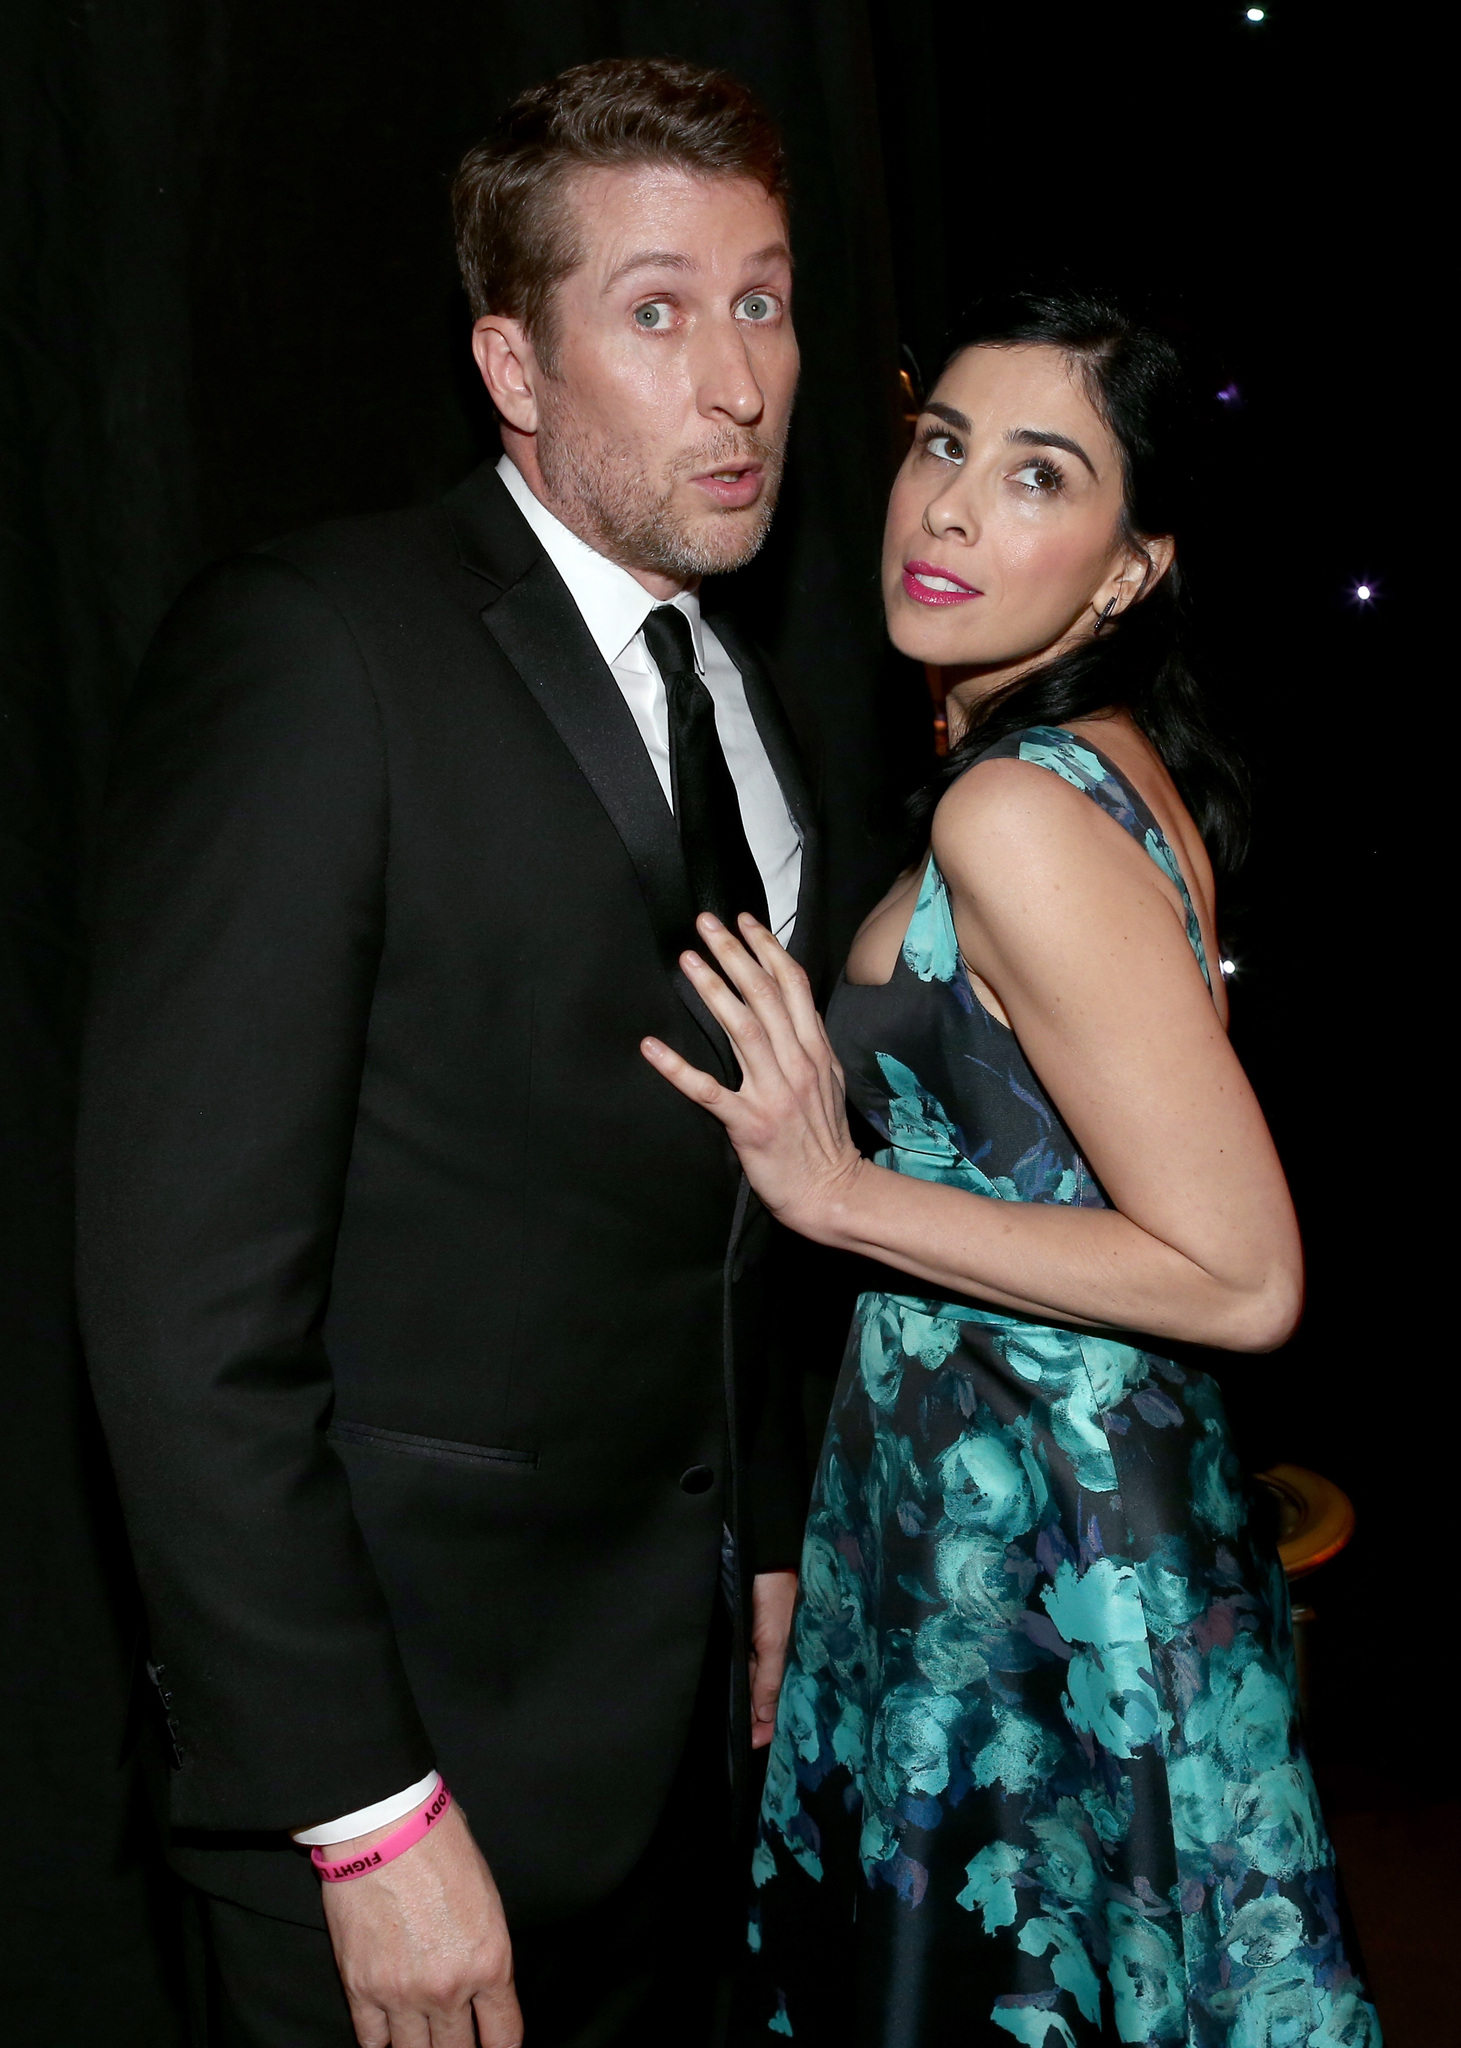 Comedians Scott Aukerman (L) and Sarah Silverman attend the 4th Annual Critics' Choice Television Awards at The Beverly Hilton Hotel on June 19, 2014 in Beverly Hills, California.